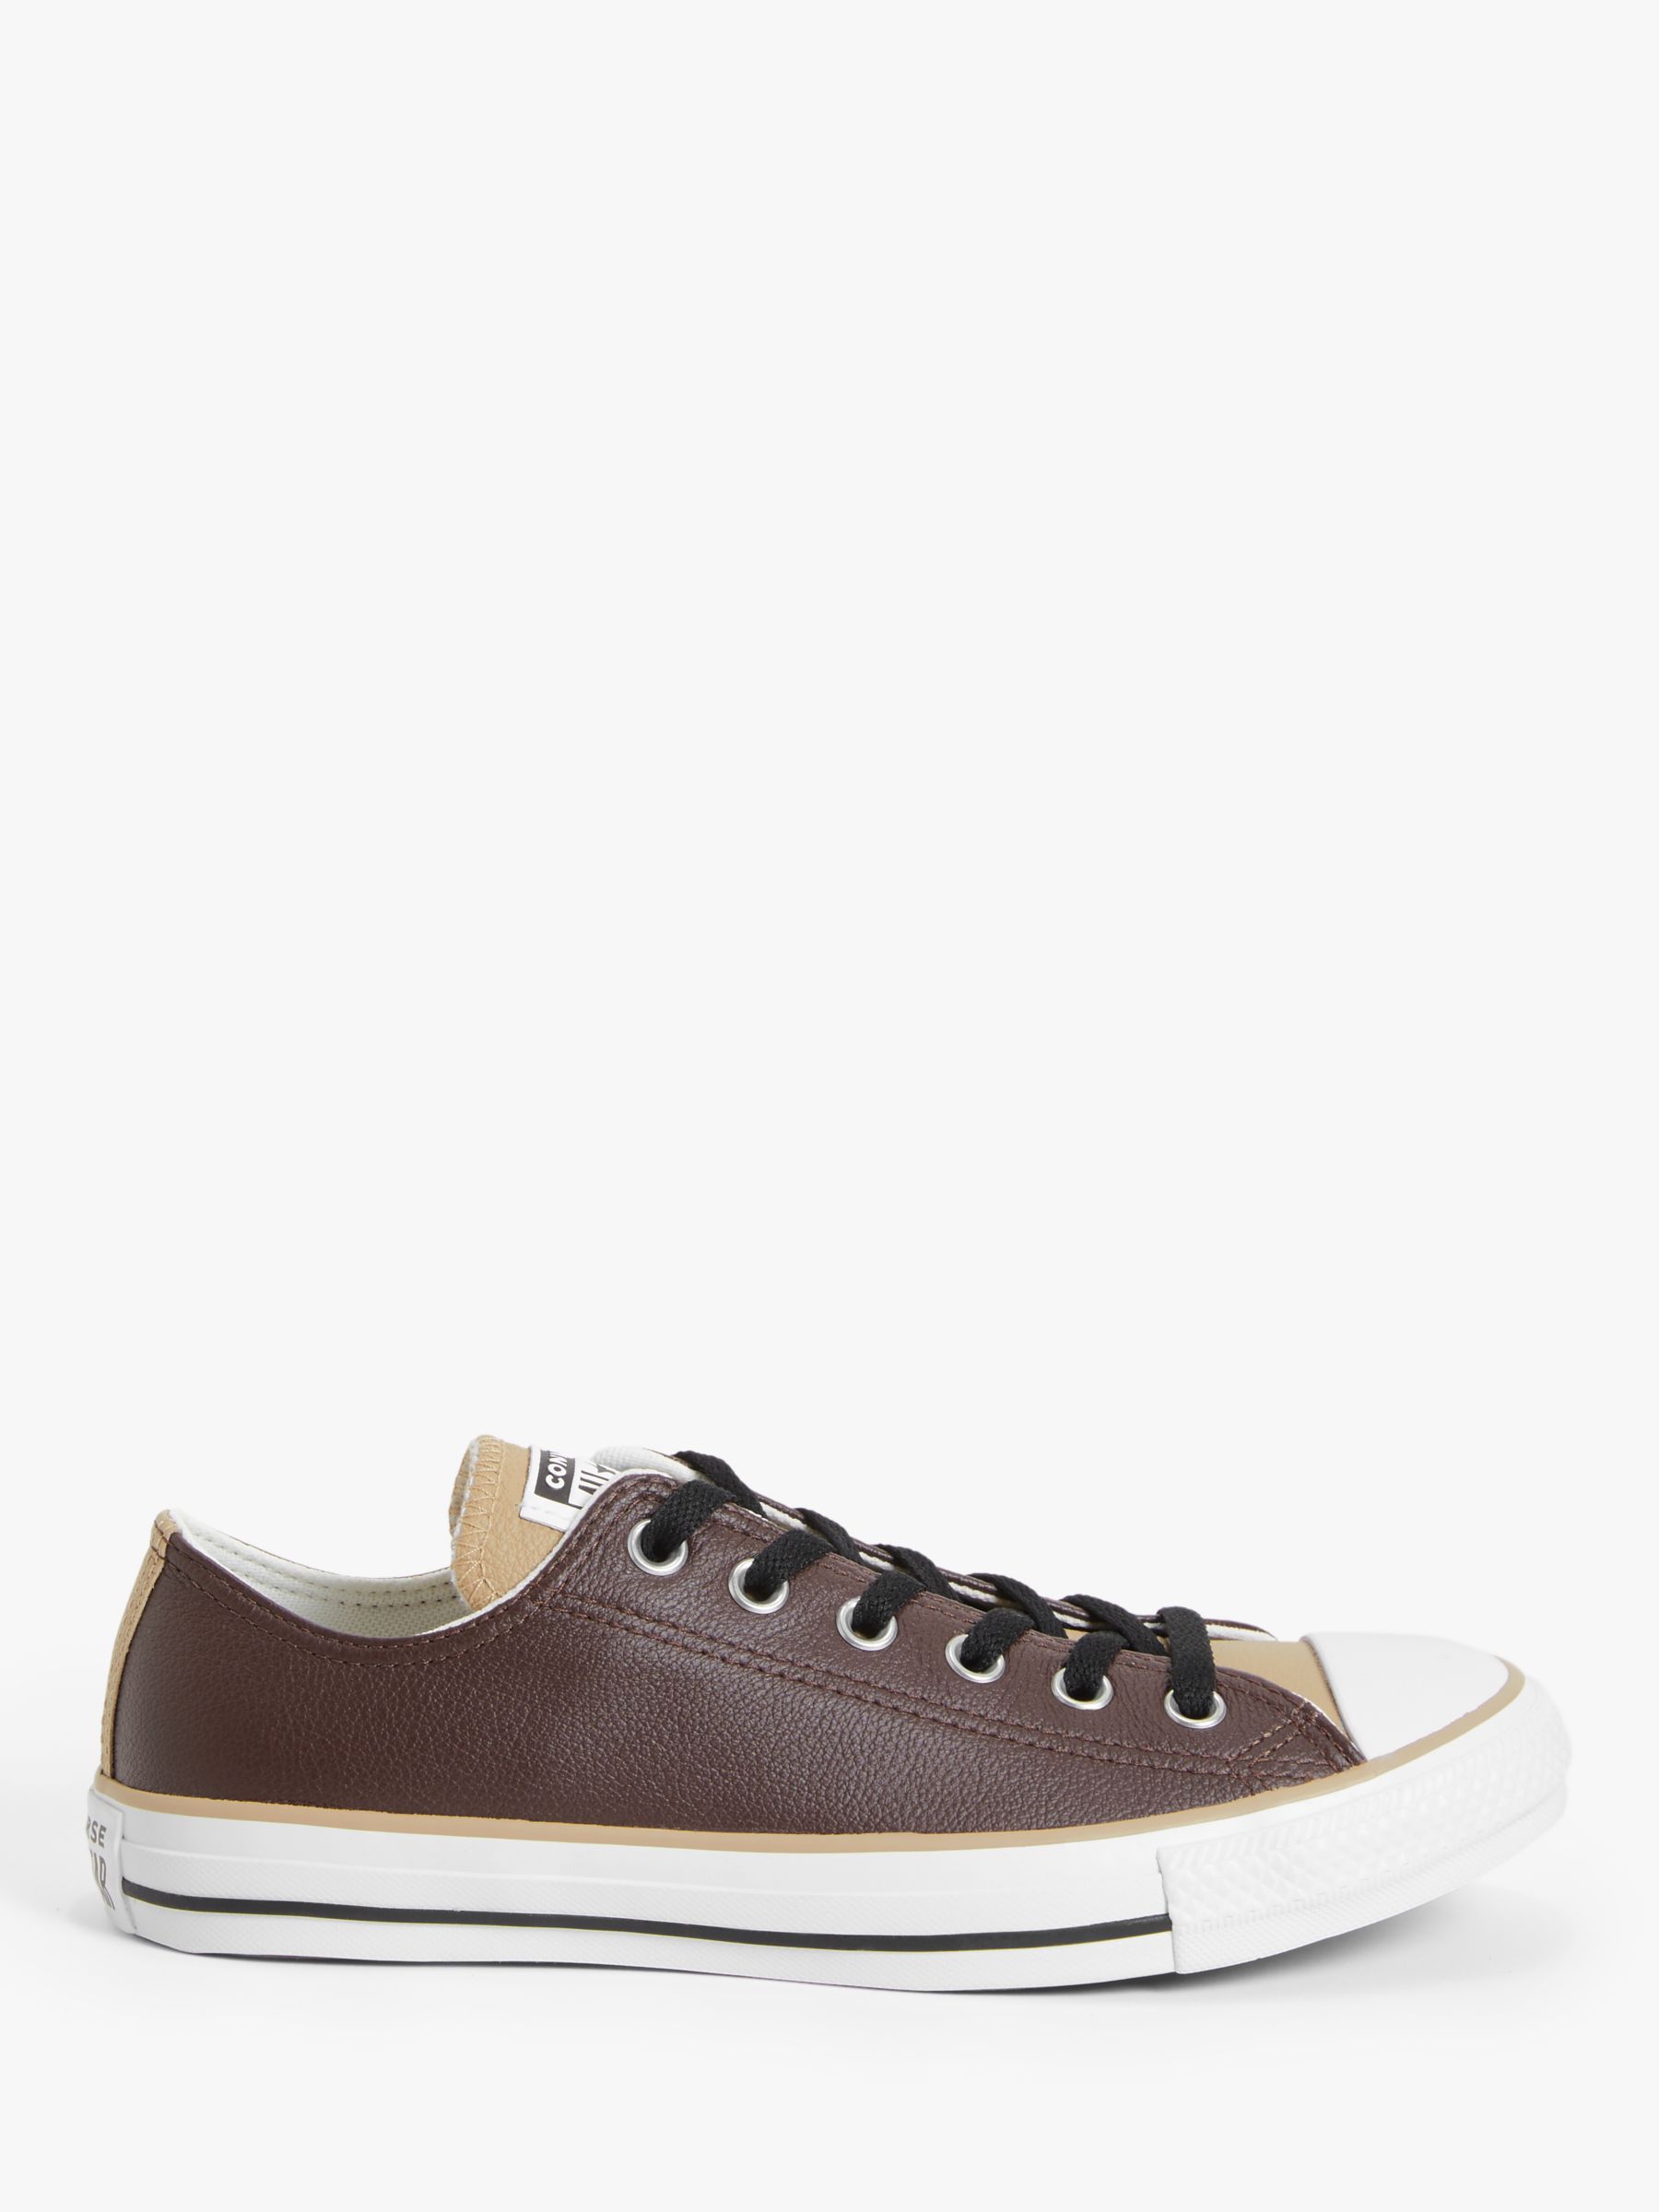 converse all star low top leather trainers